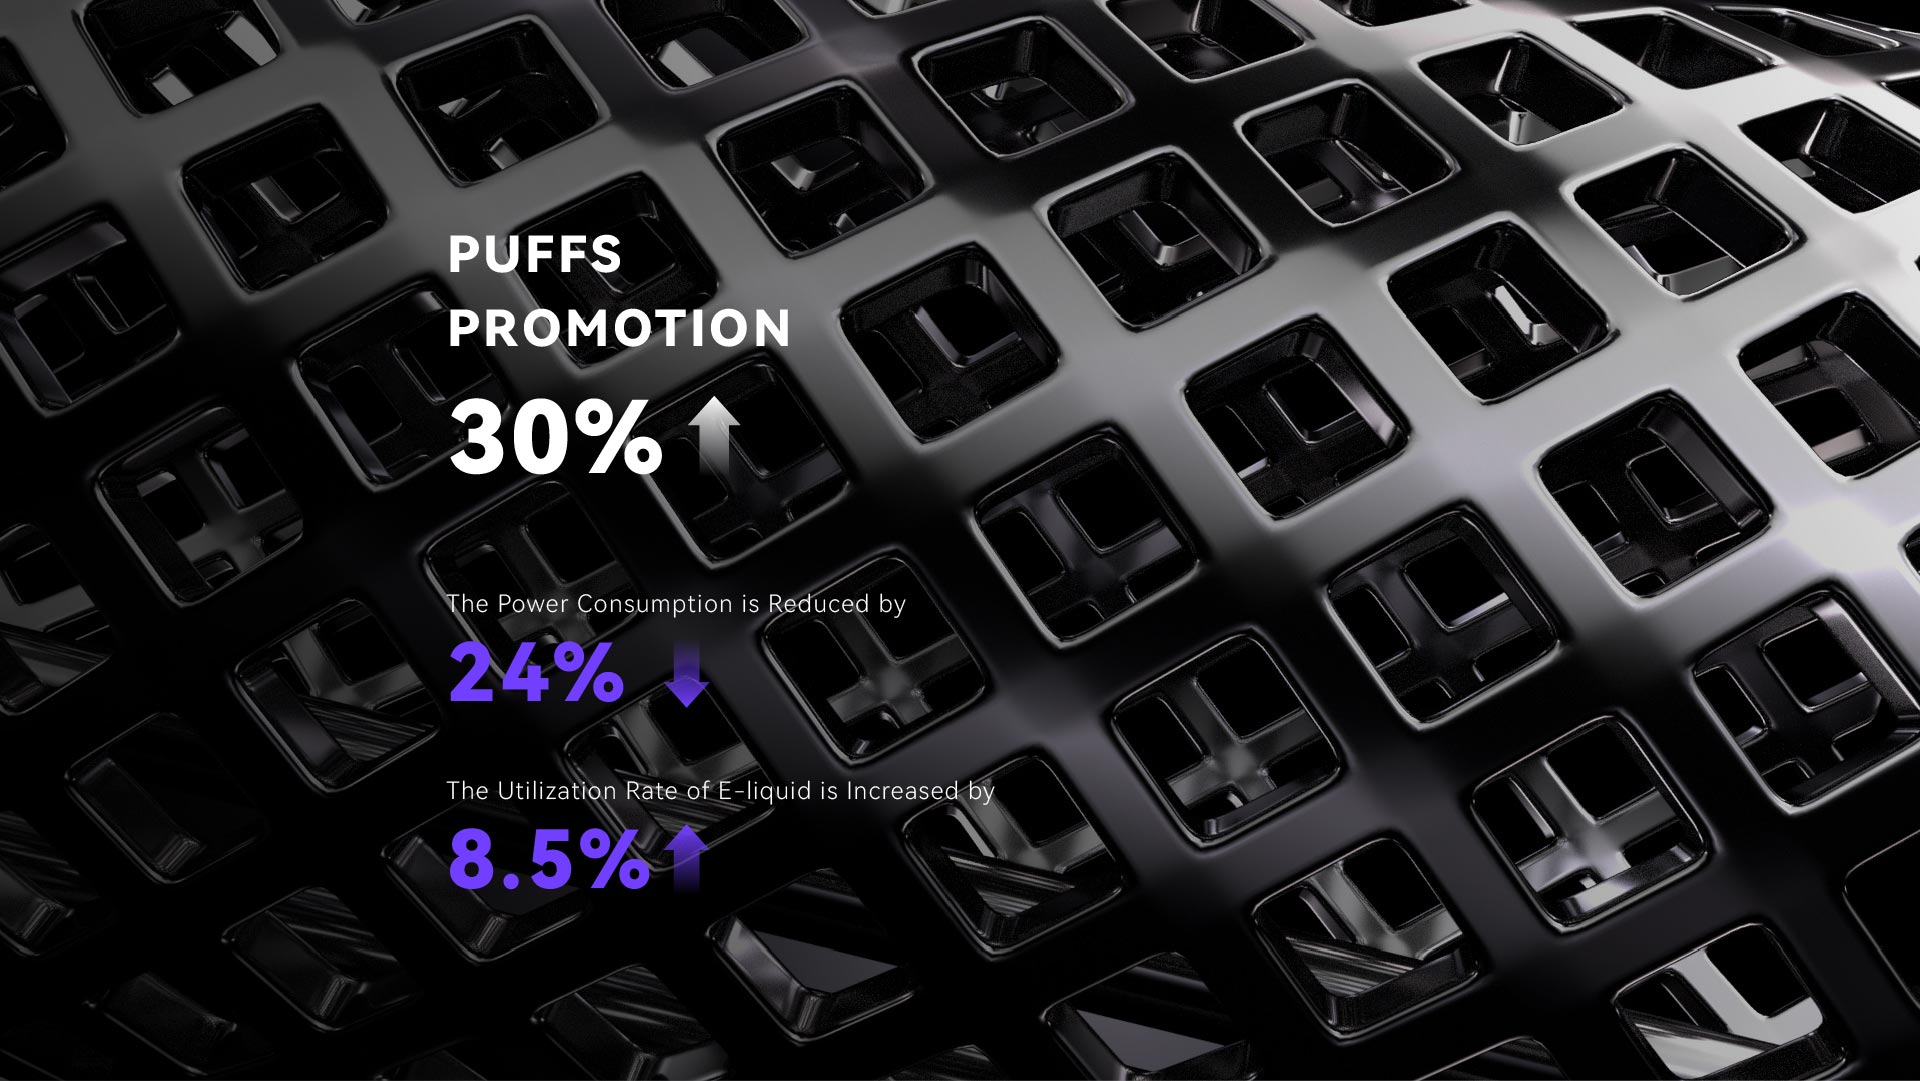 Increased puff count with power consumption reduced by 24% and liquid efficiency improved by 8.5%